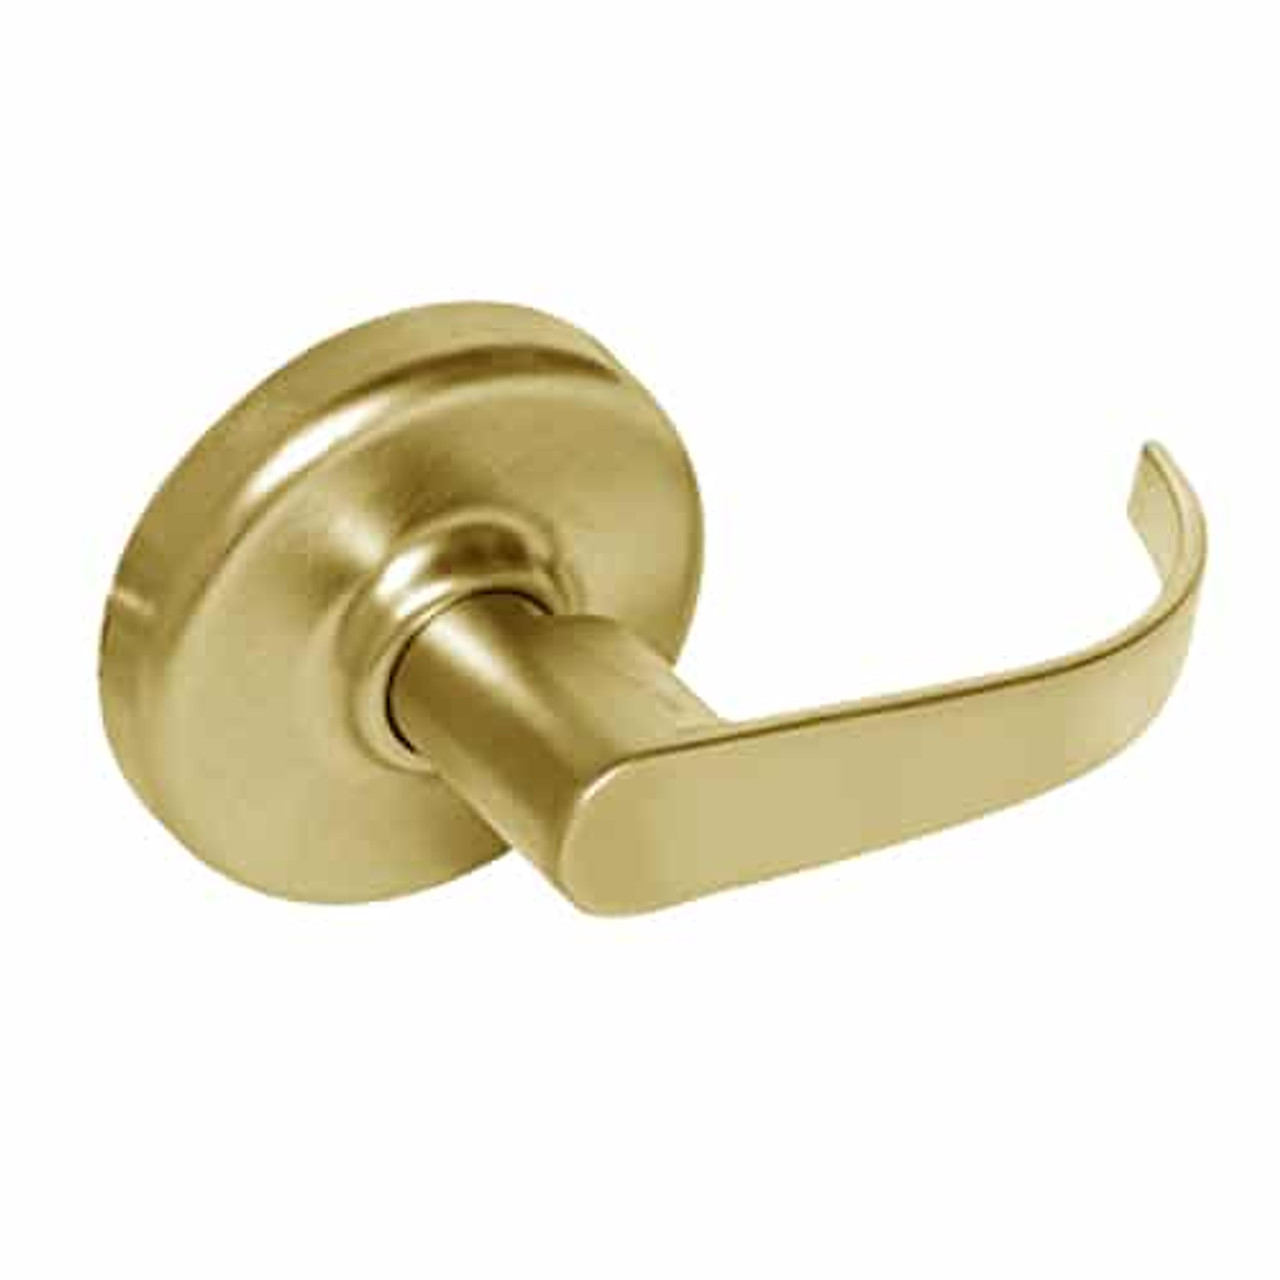 CL3810-PZD-605 Corbin CL3800 Series Standard-Duty Passage Cylindrical Locksets with Princeton Lever in Bright Brass Finish